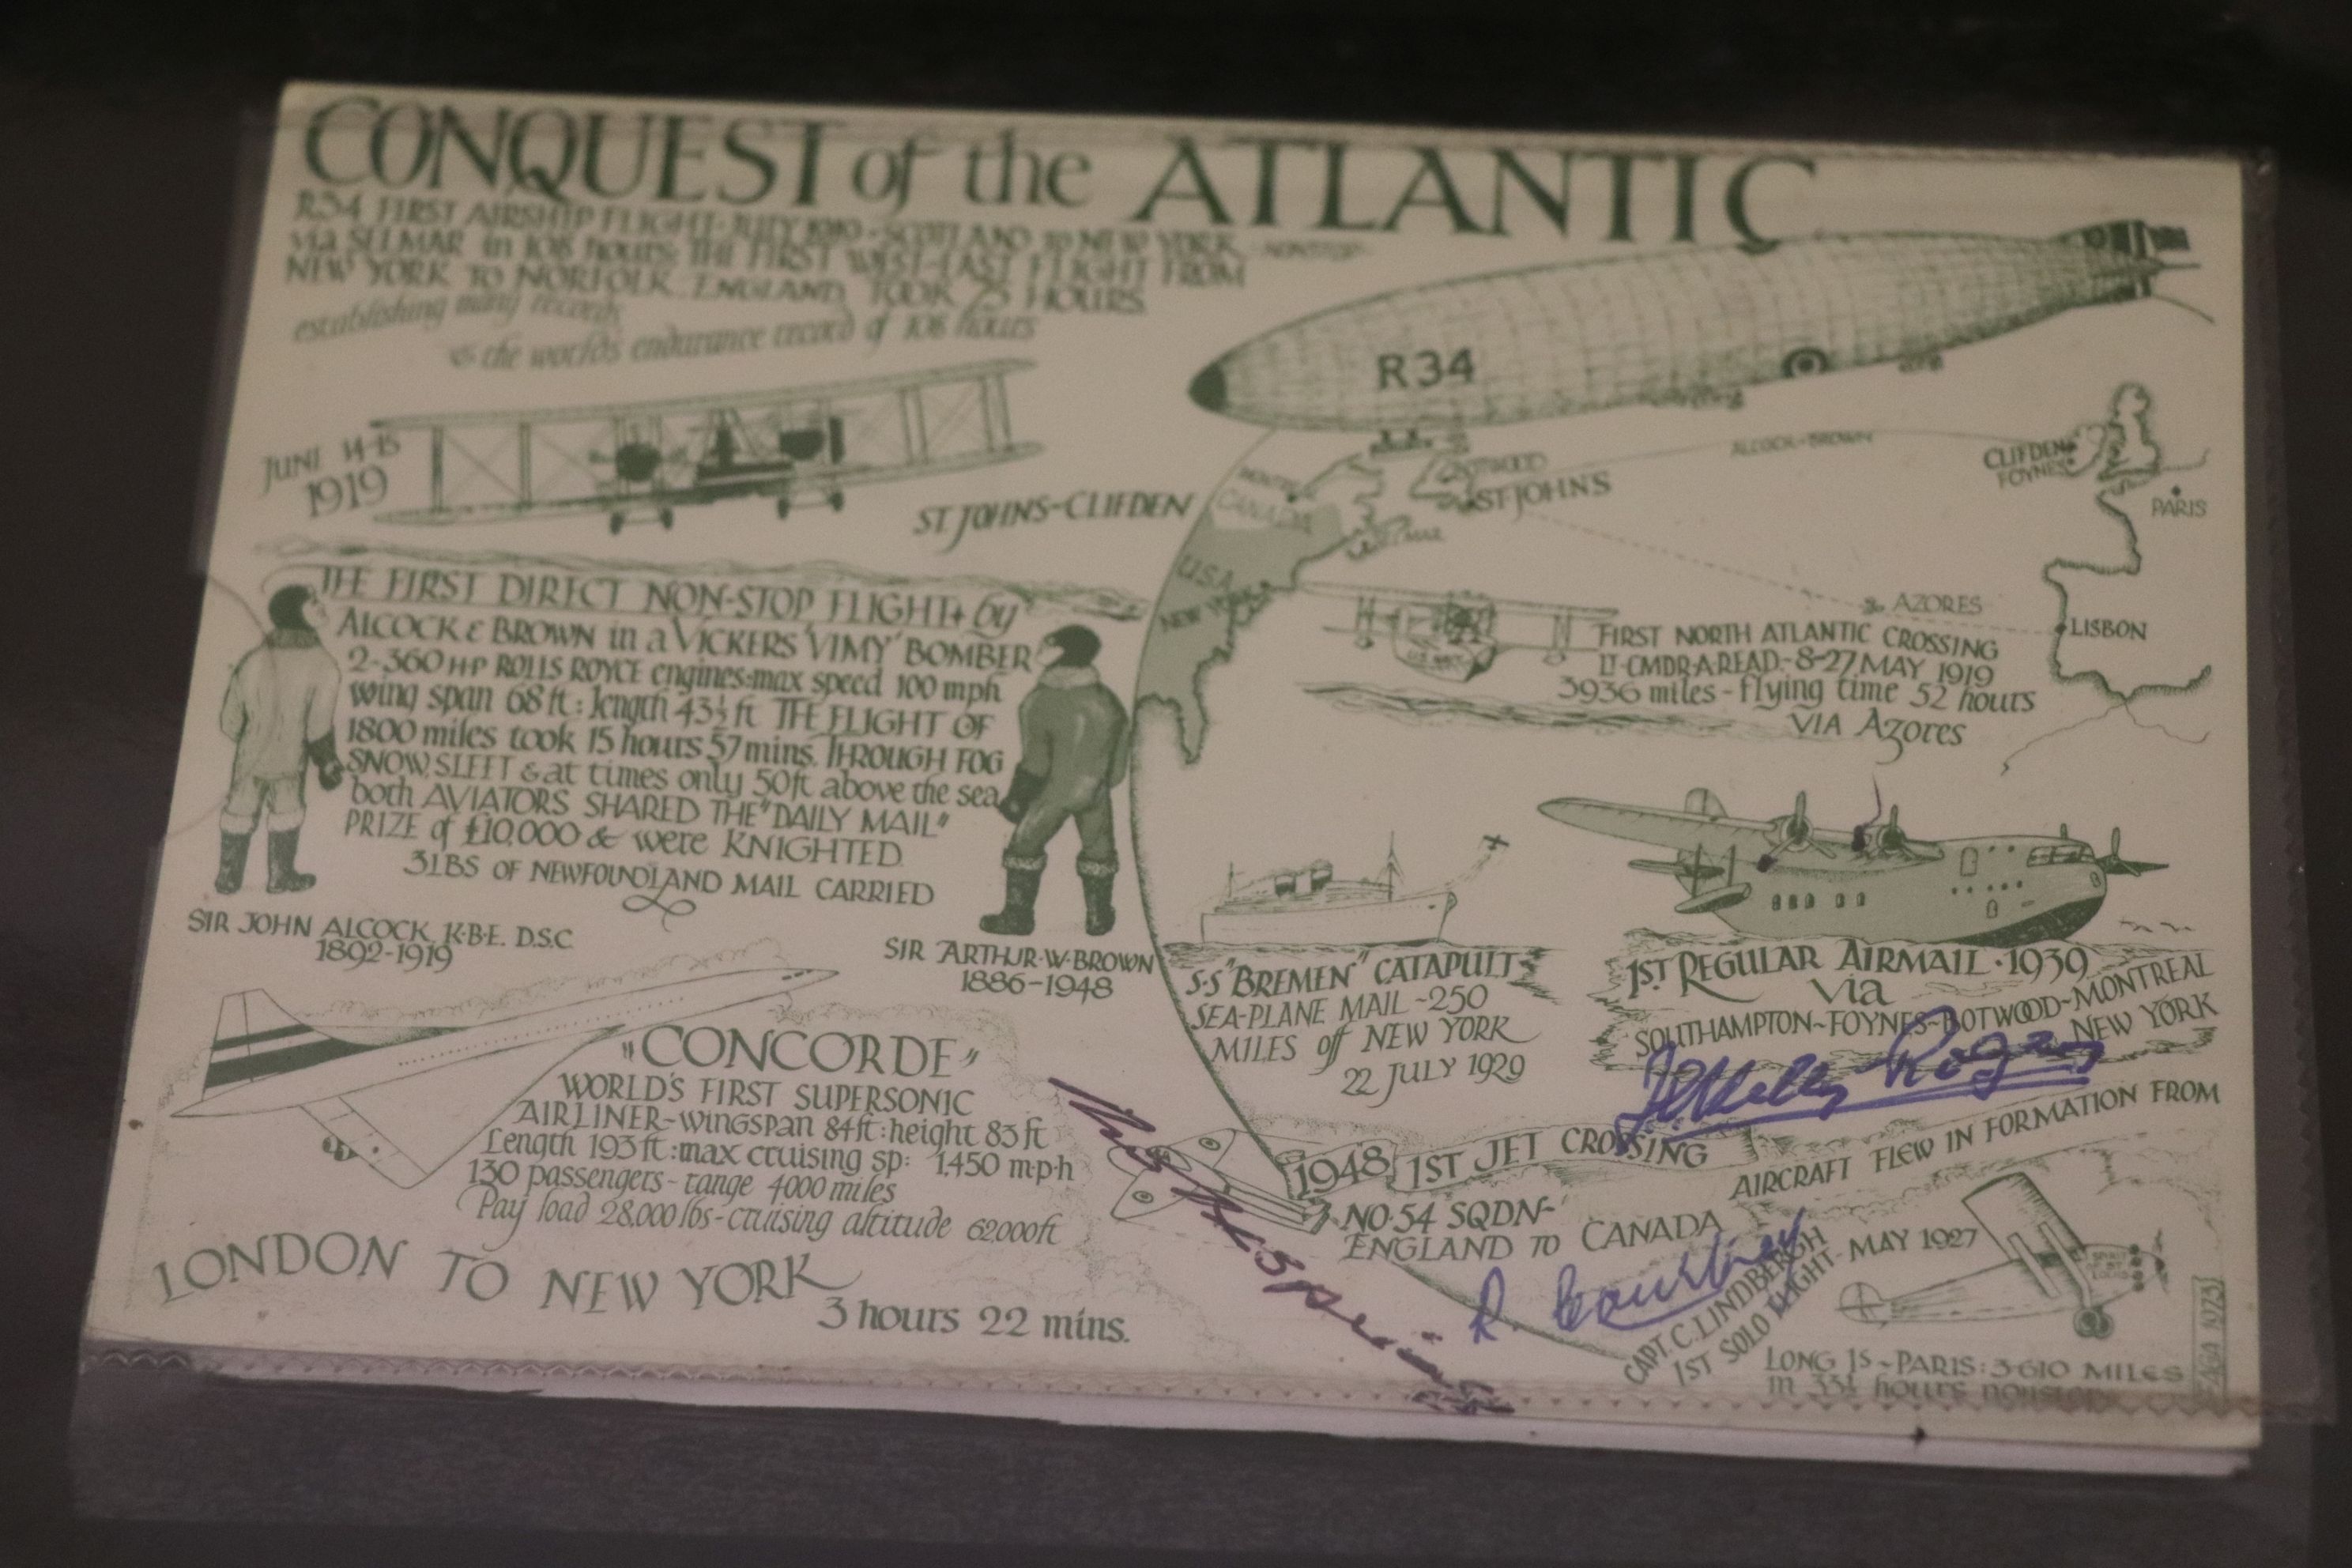 Conquest of The Atlantic postcard (mounted) signed by crew members Browdie, Wing Commander Evenden - Image 4 of 4